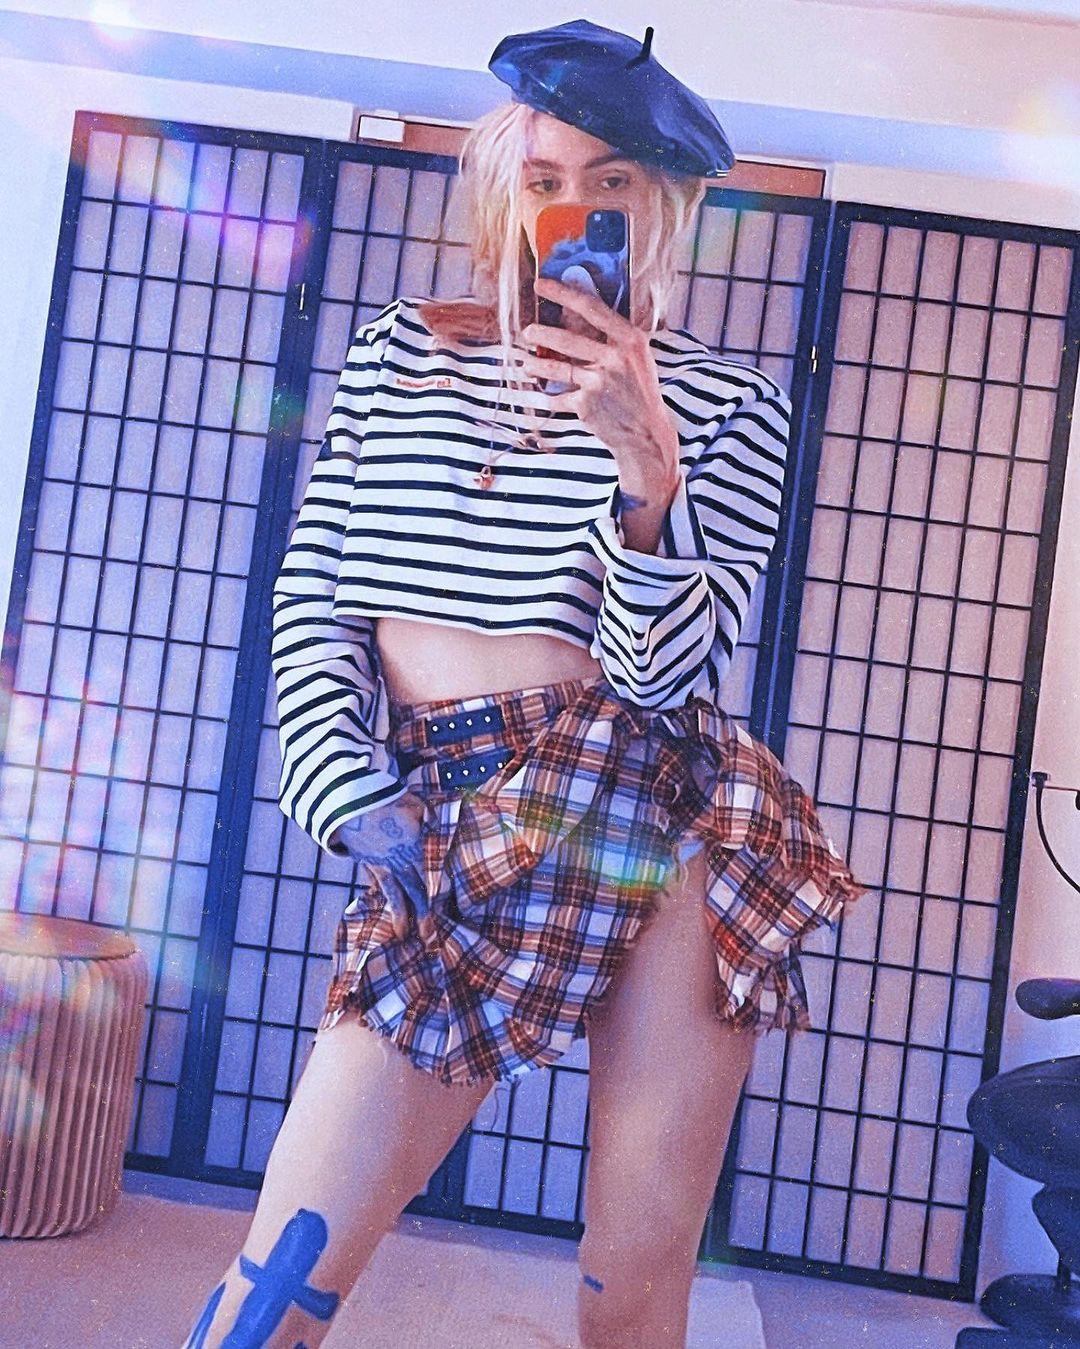 Grimes wearing a plaid skirt and striped shirt.